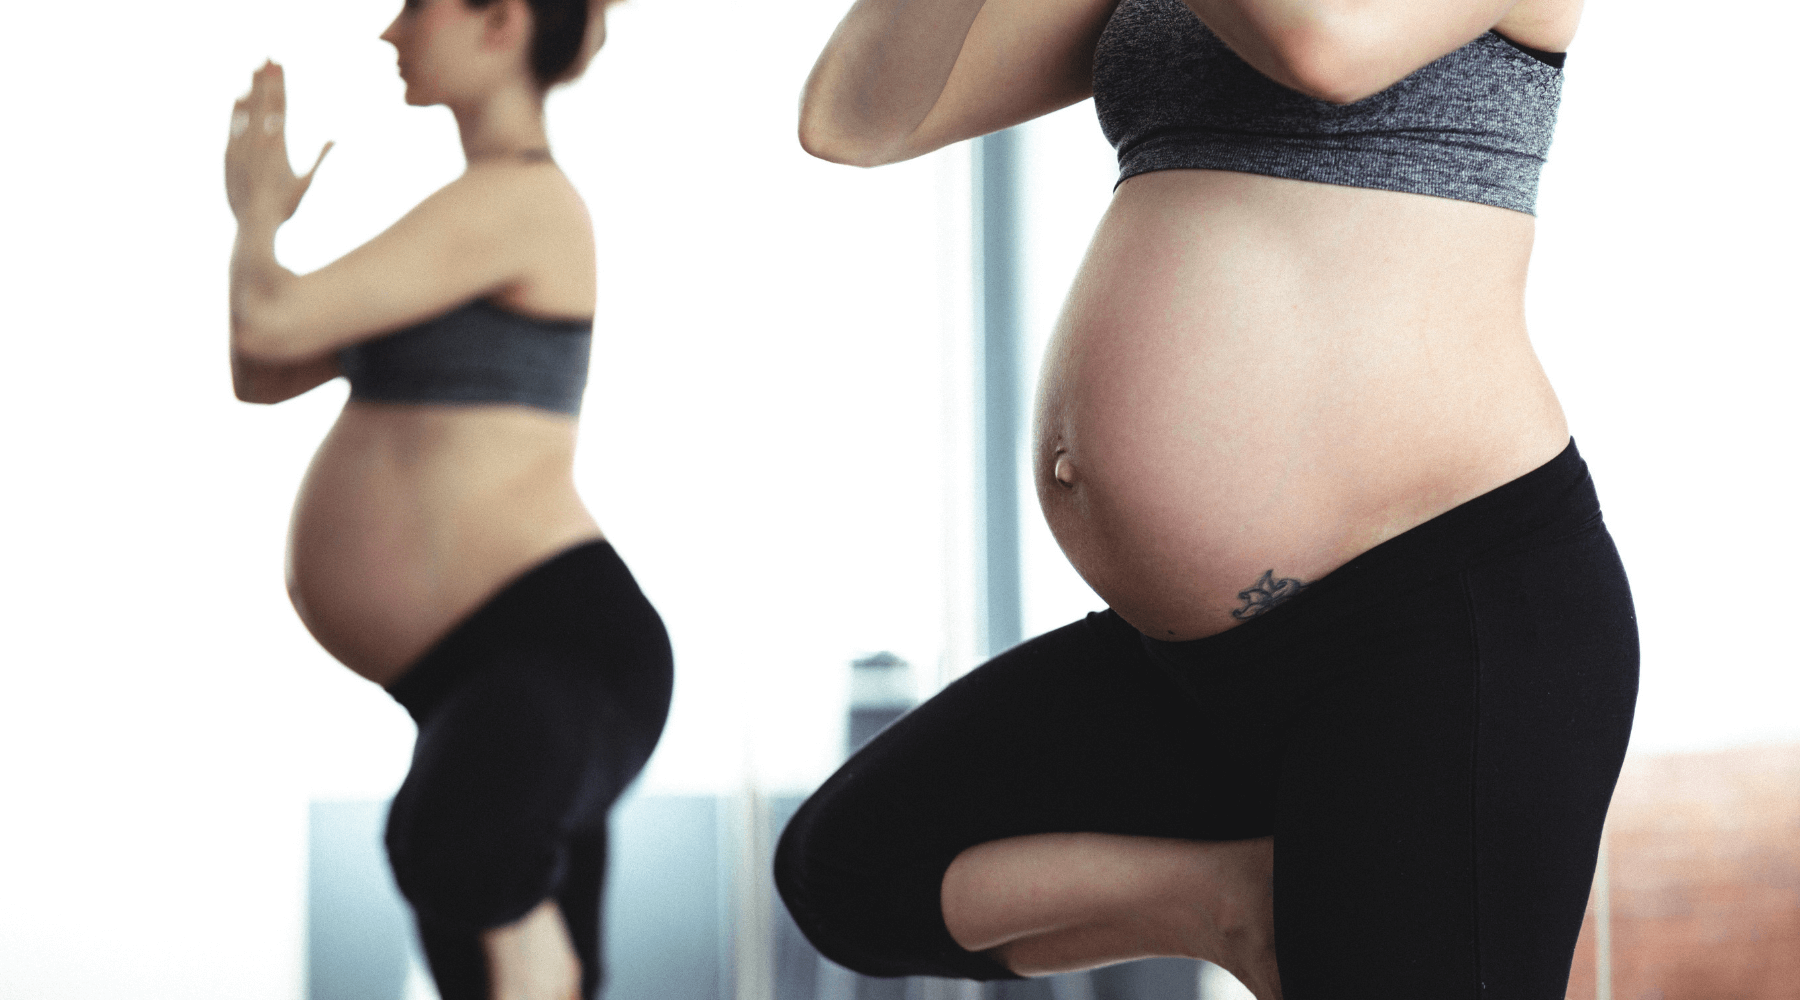 Do You Know What Exercise Does to Pregnancy?